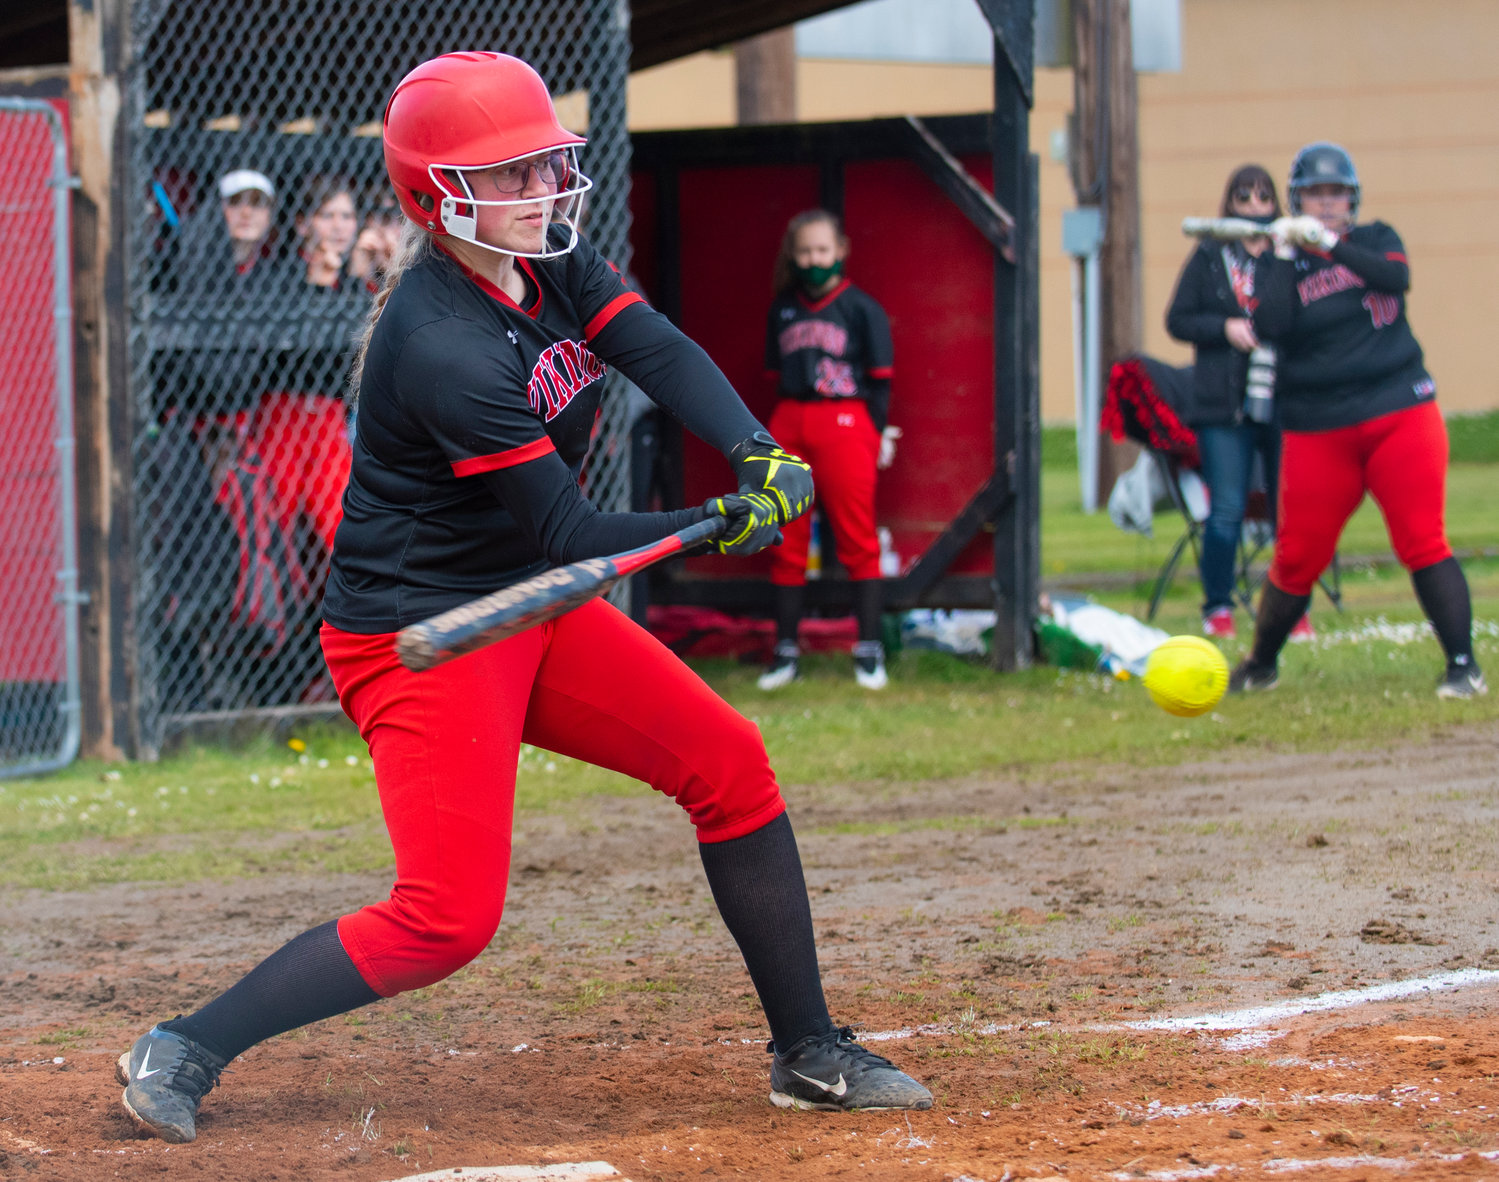 Mossyrock's Trista Rockwood swings at an Oakville pitch on Thursday.